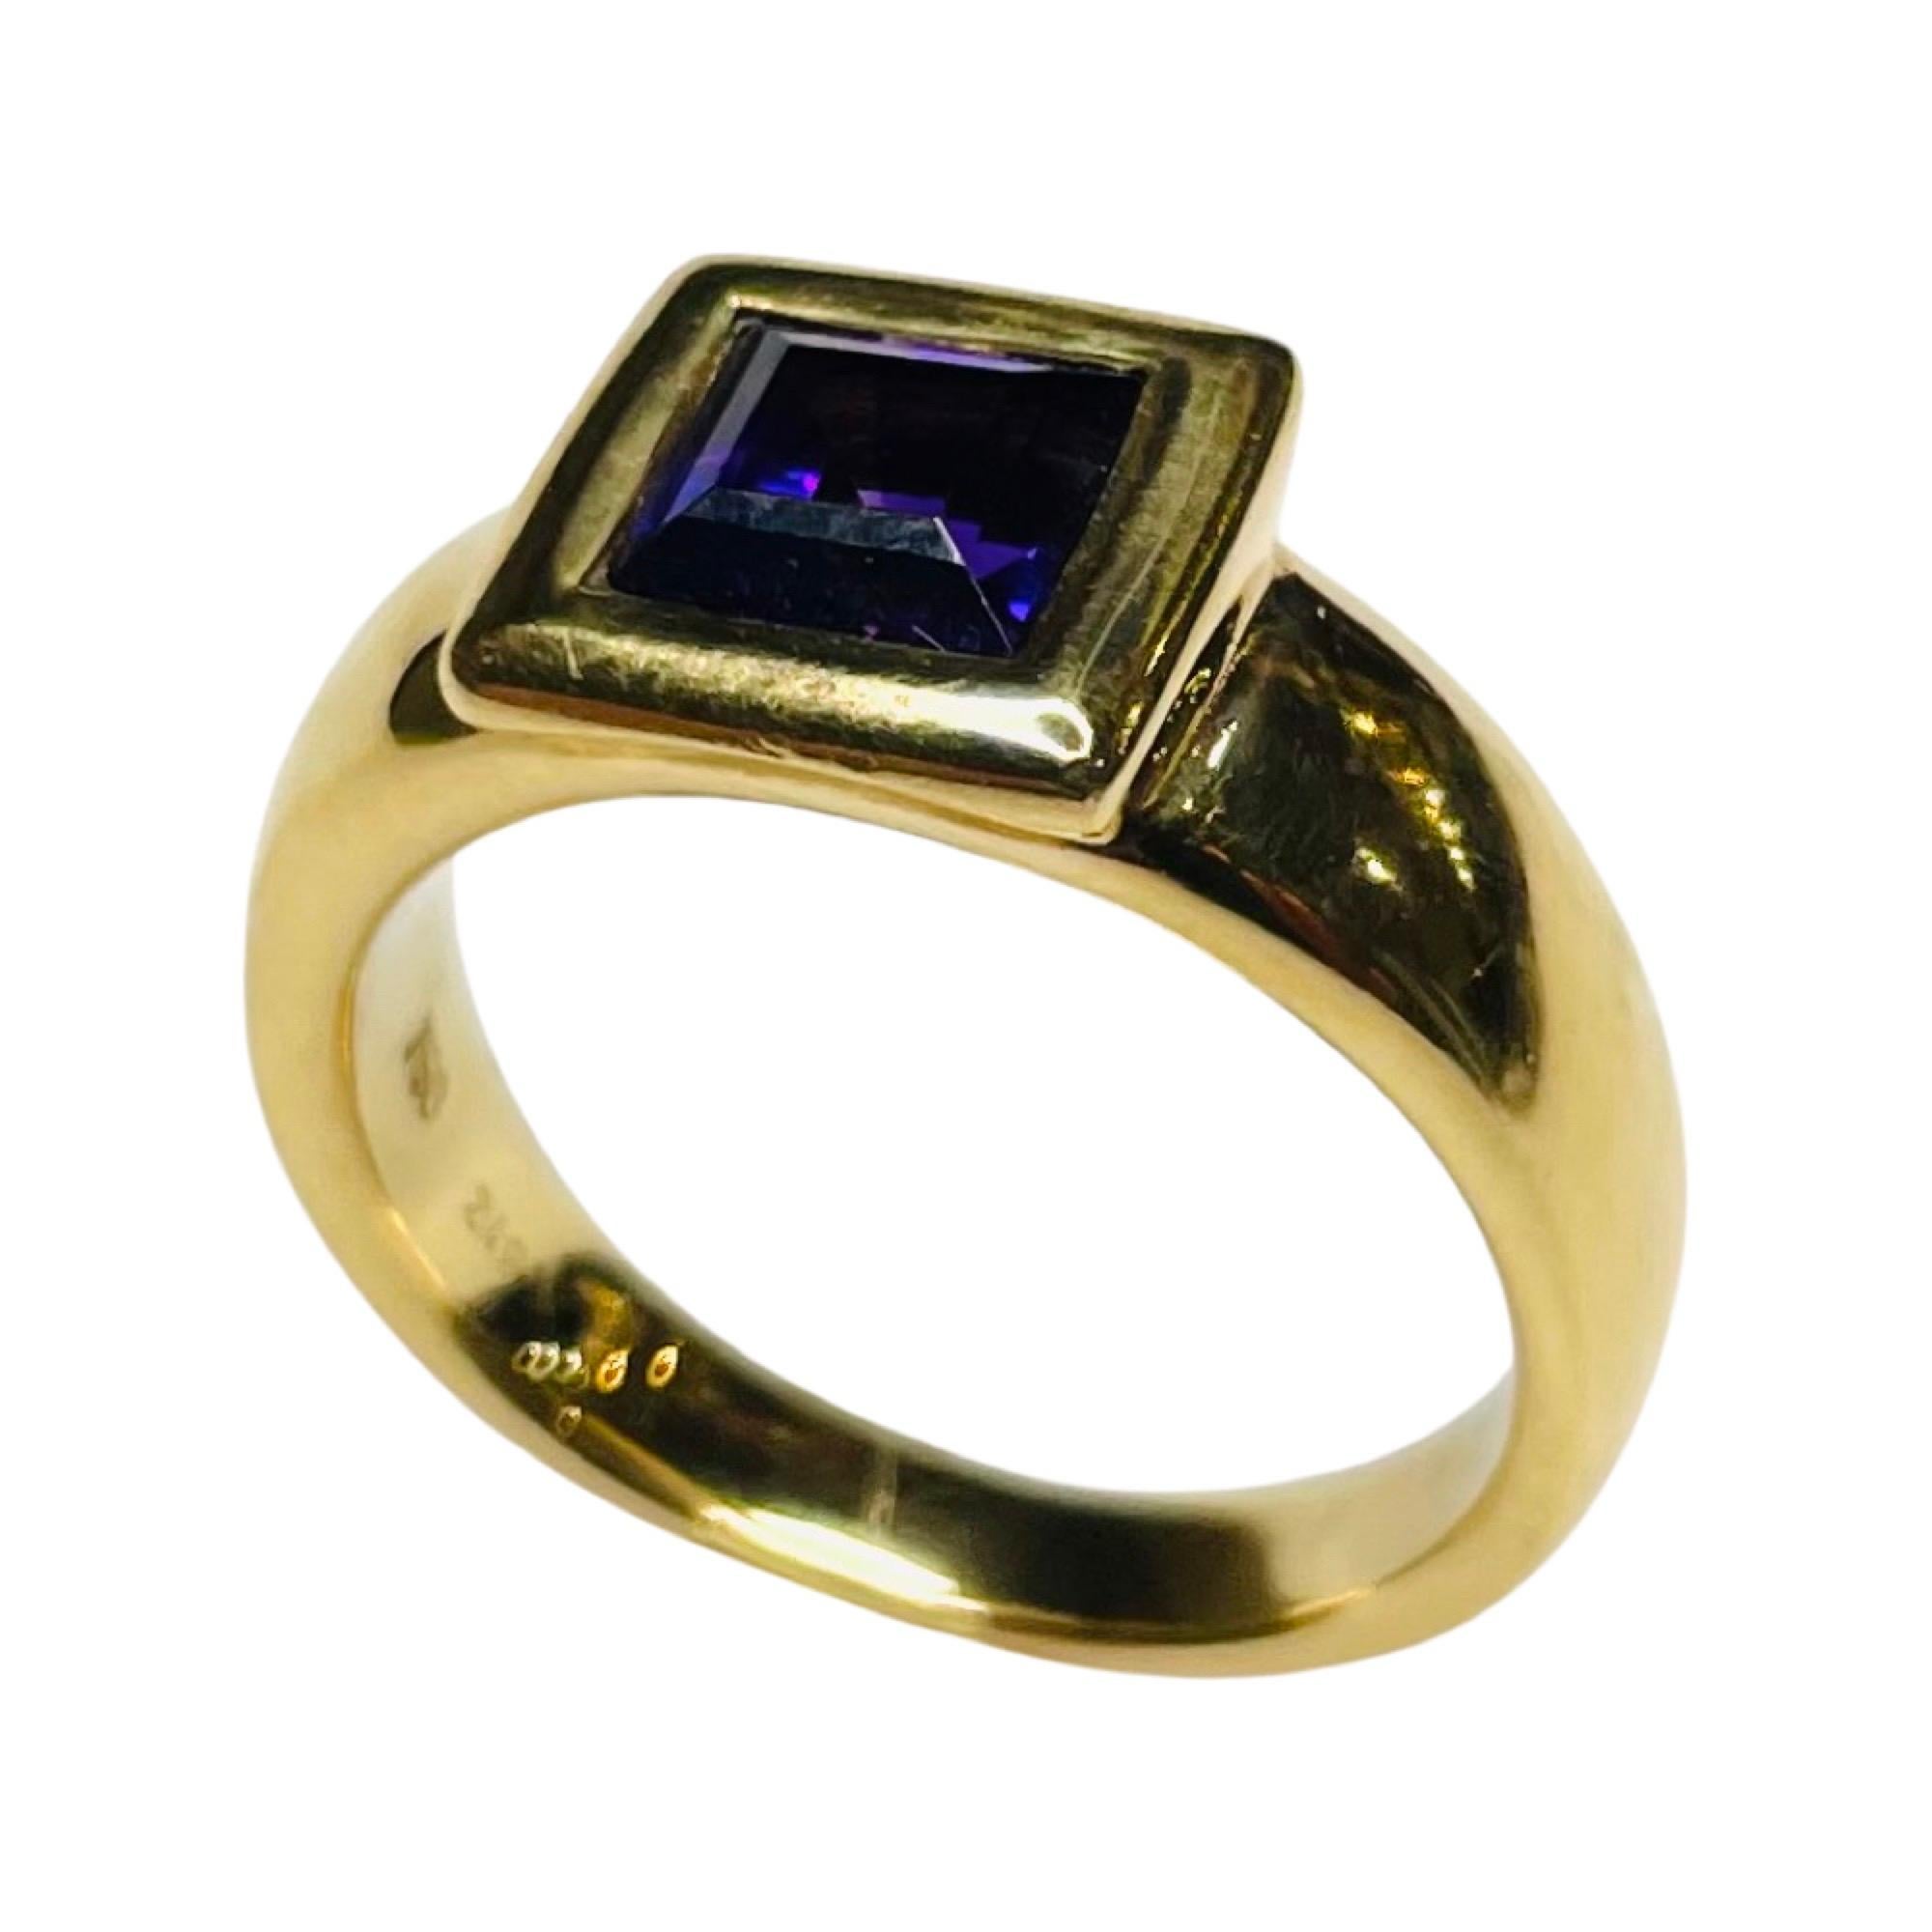 Hammer & Sohne 18k Yellow Gold Ring with Square Cut Faceted Amethyst. It is finger size 7.  It can be sized for an additional fee. The bezel is 9.25 mm. The shank is 6.0 mm at the top and tapers to 3.5 mm at the base of the shank. 100-70-51